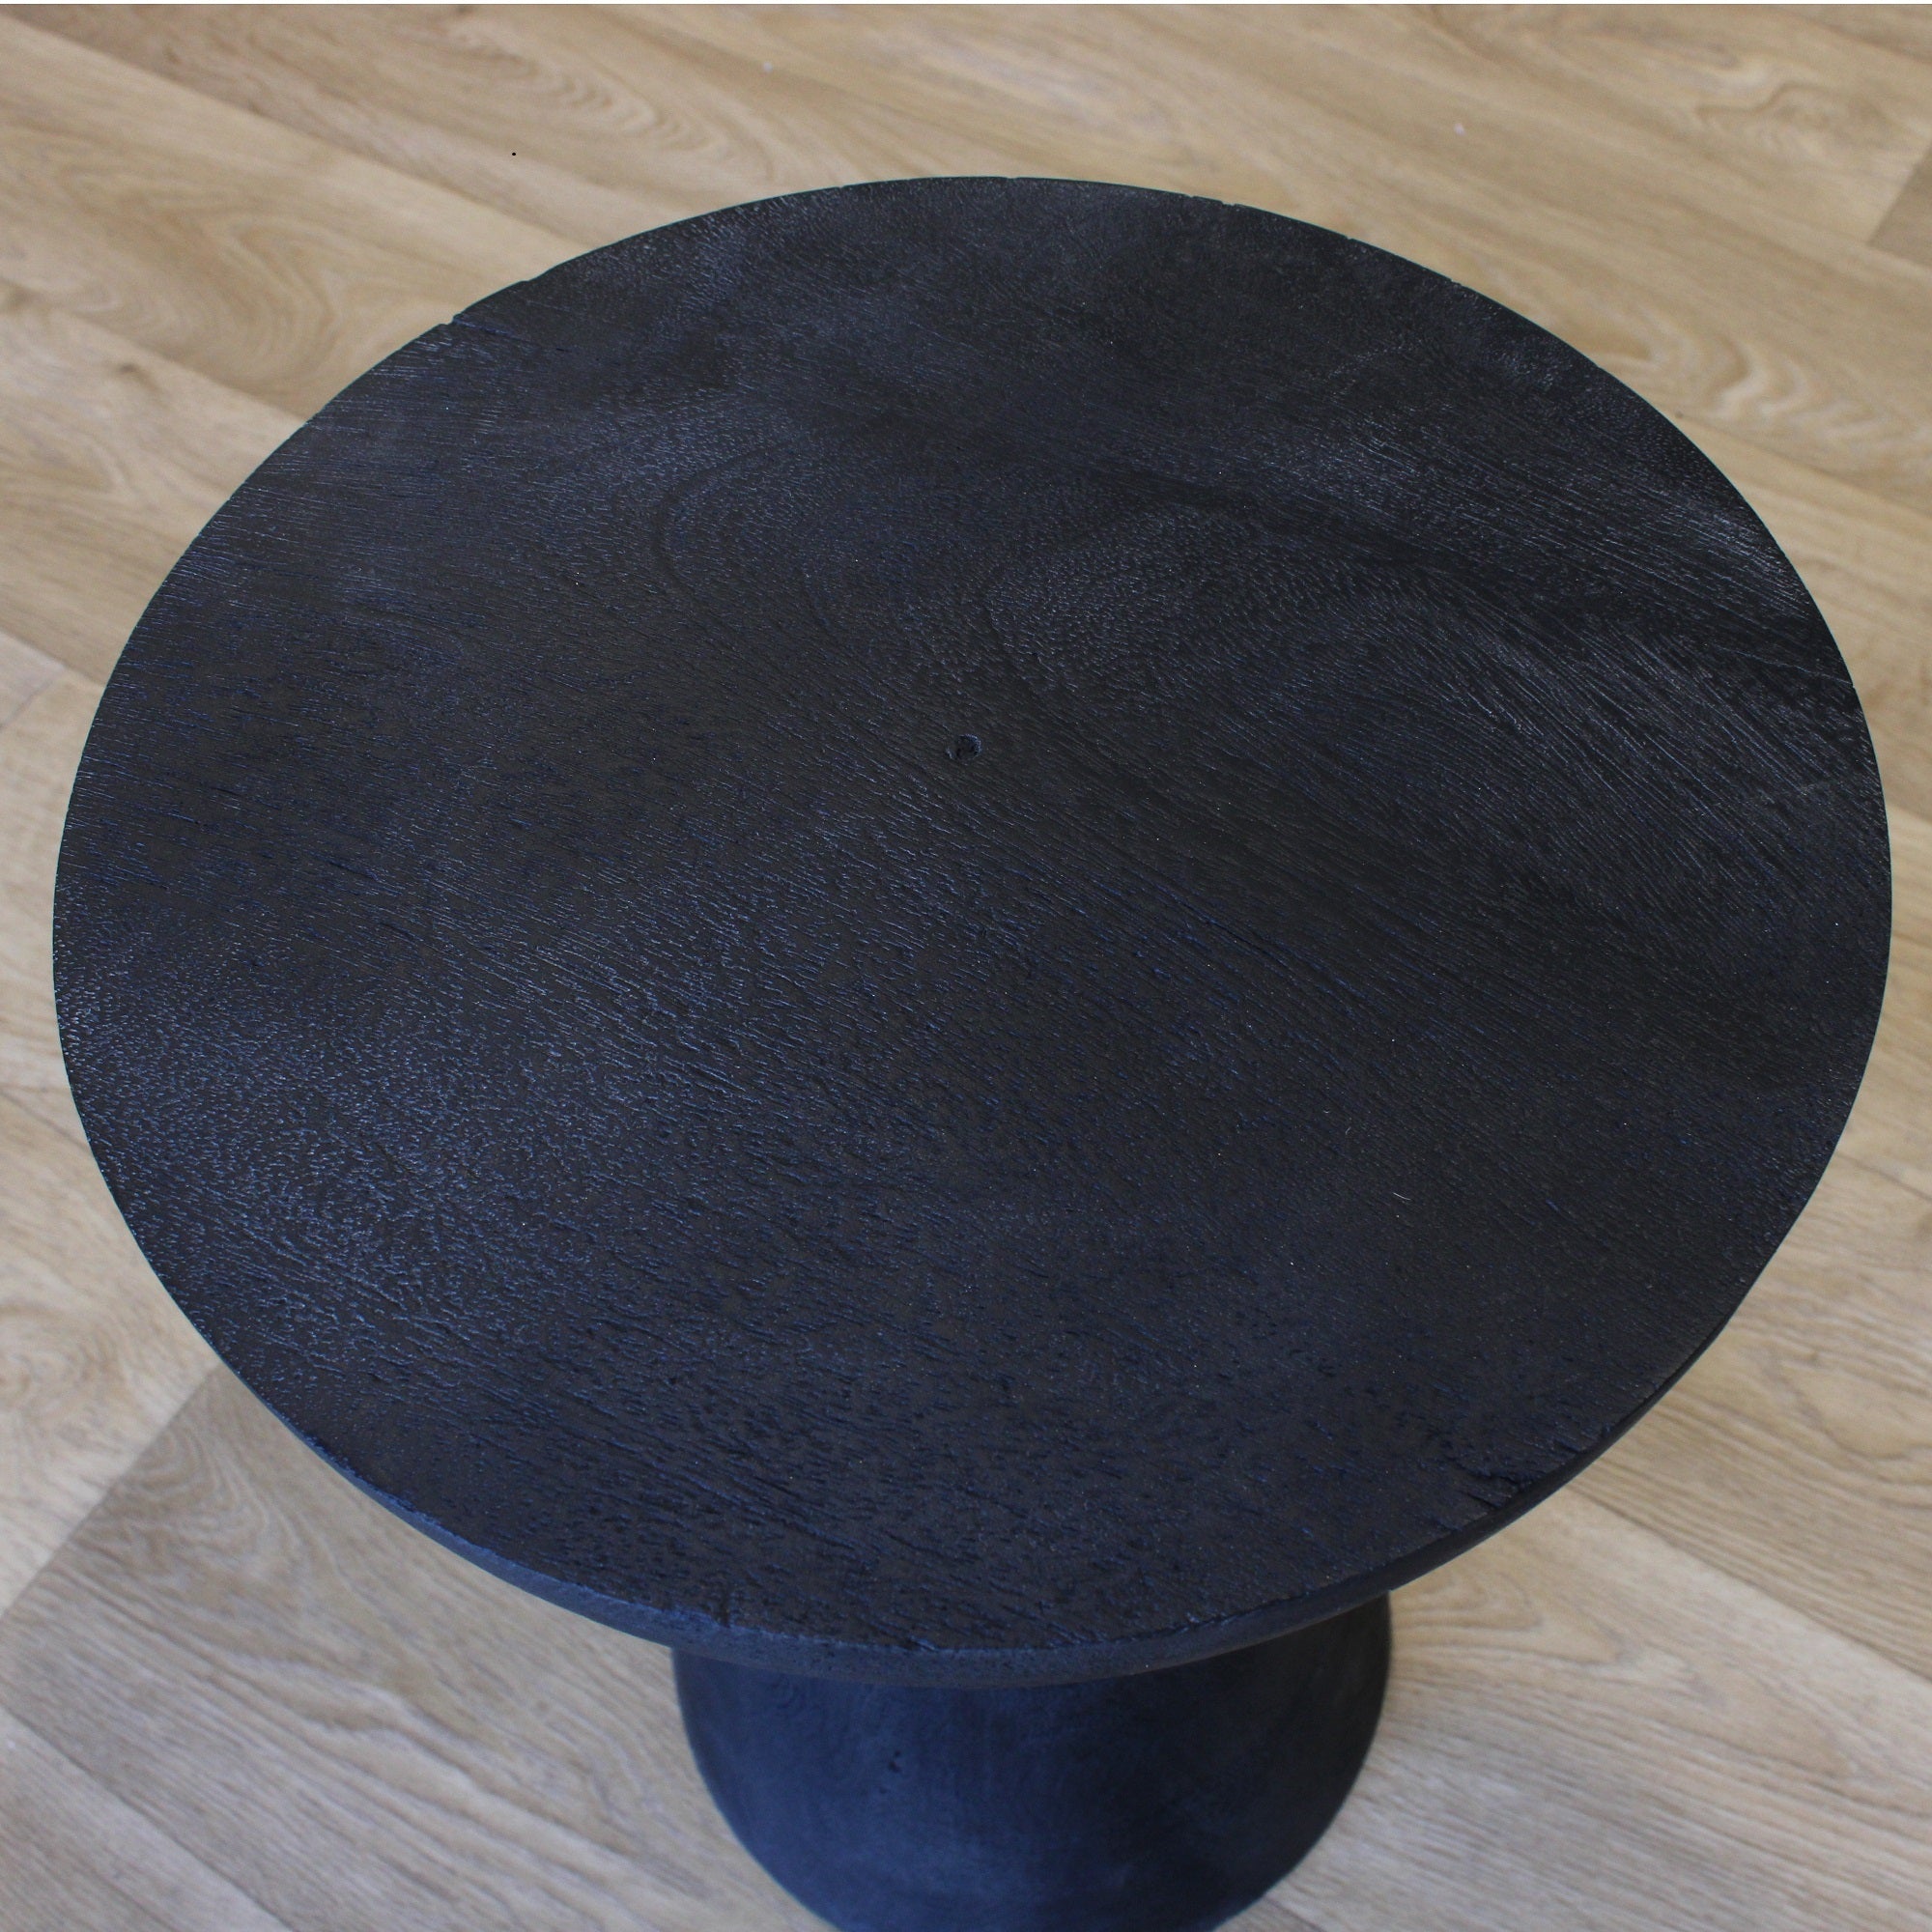 Gil Black Wooden Coffee Table